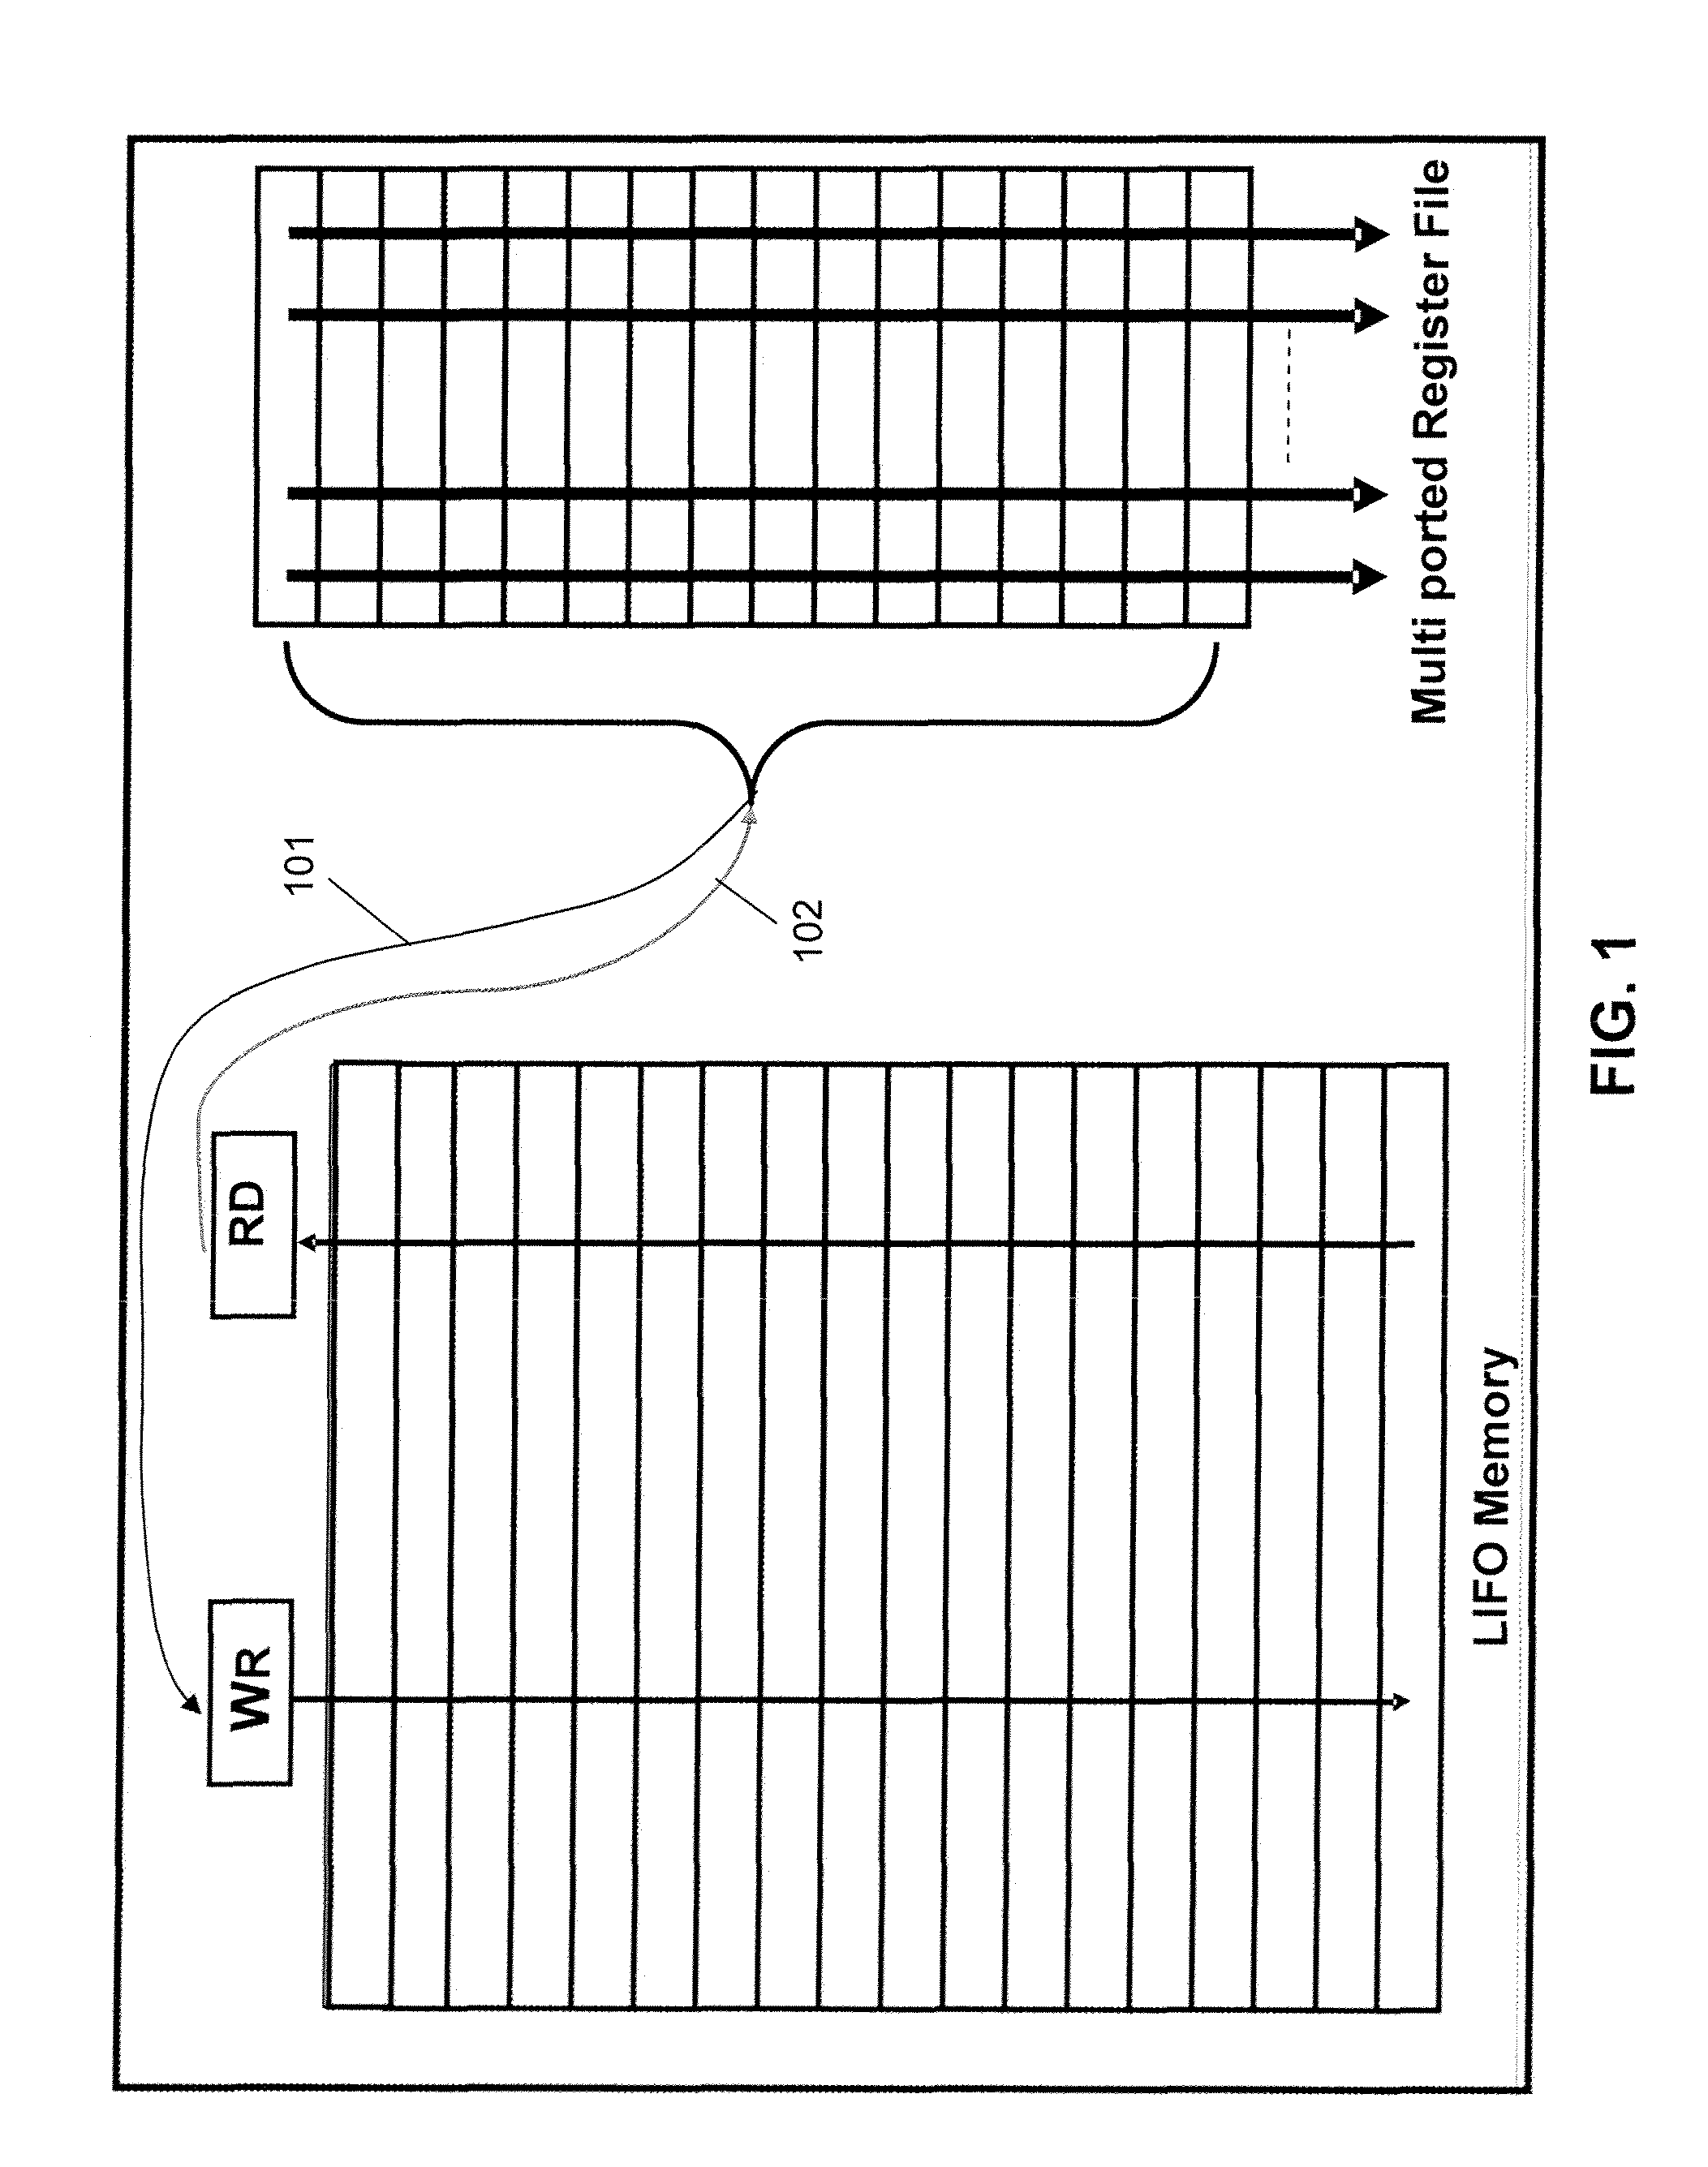 Parallel processing of a sequential program using hardware generated threads and their instruction groups executing on plural execution units and accessing register file segments using dependency inheritance vectors across multiple engines